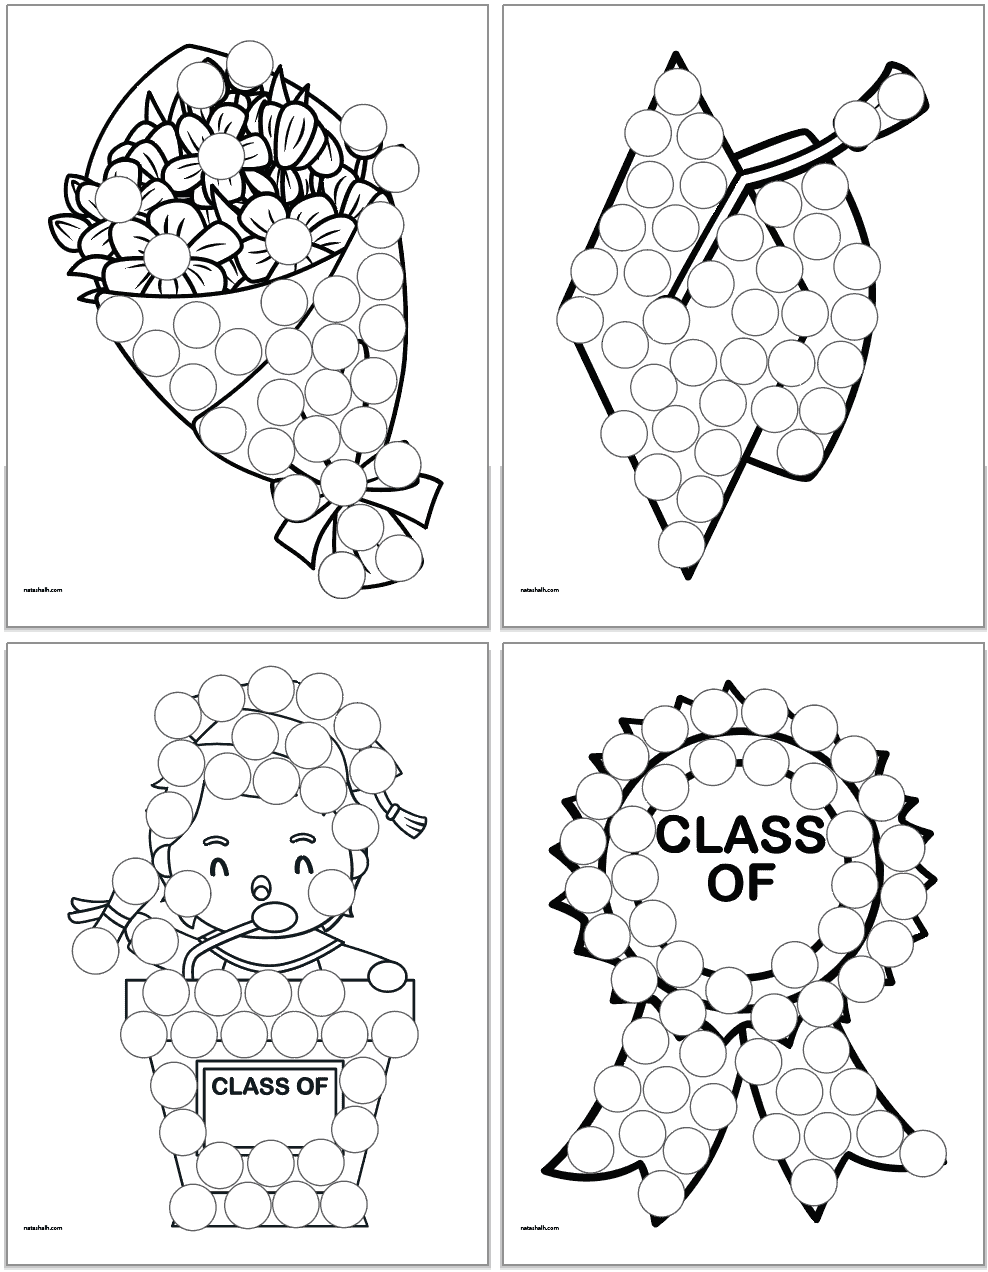 A preview of four preschool/kindergarten graduation dot marker pages. Pages show: a bouquet, a mortar board, a boy at a podium, and an award ribbon